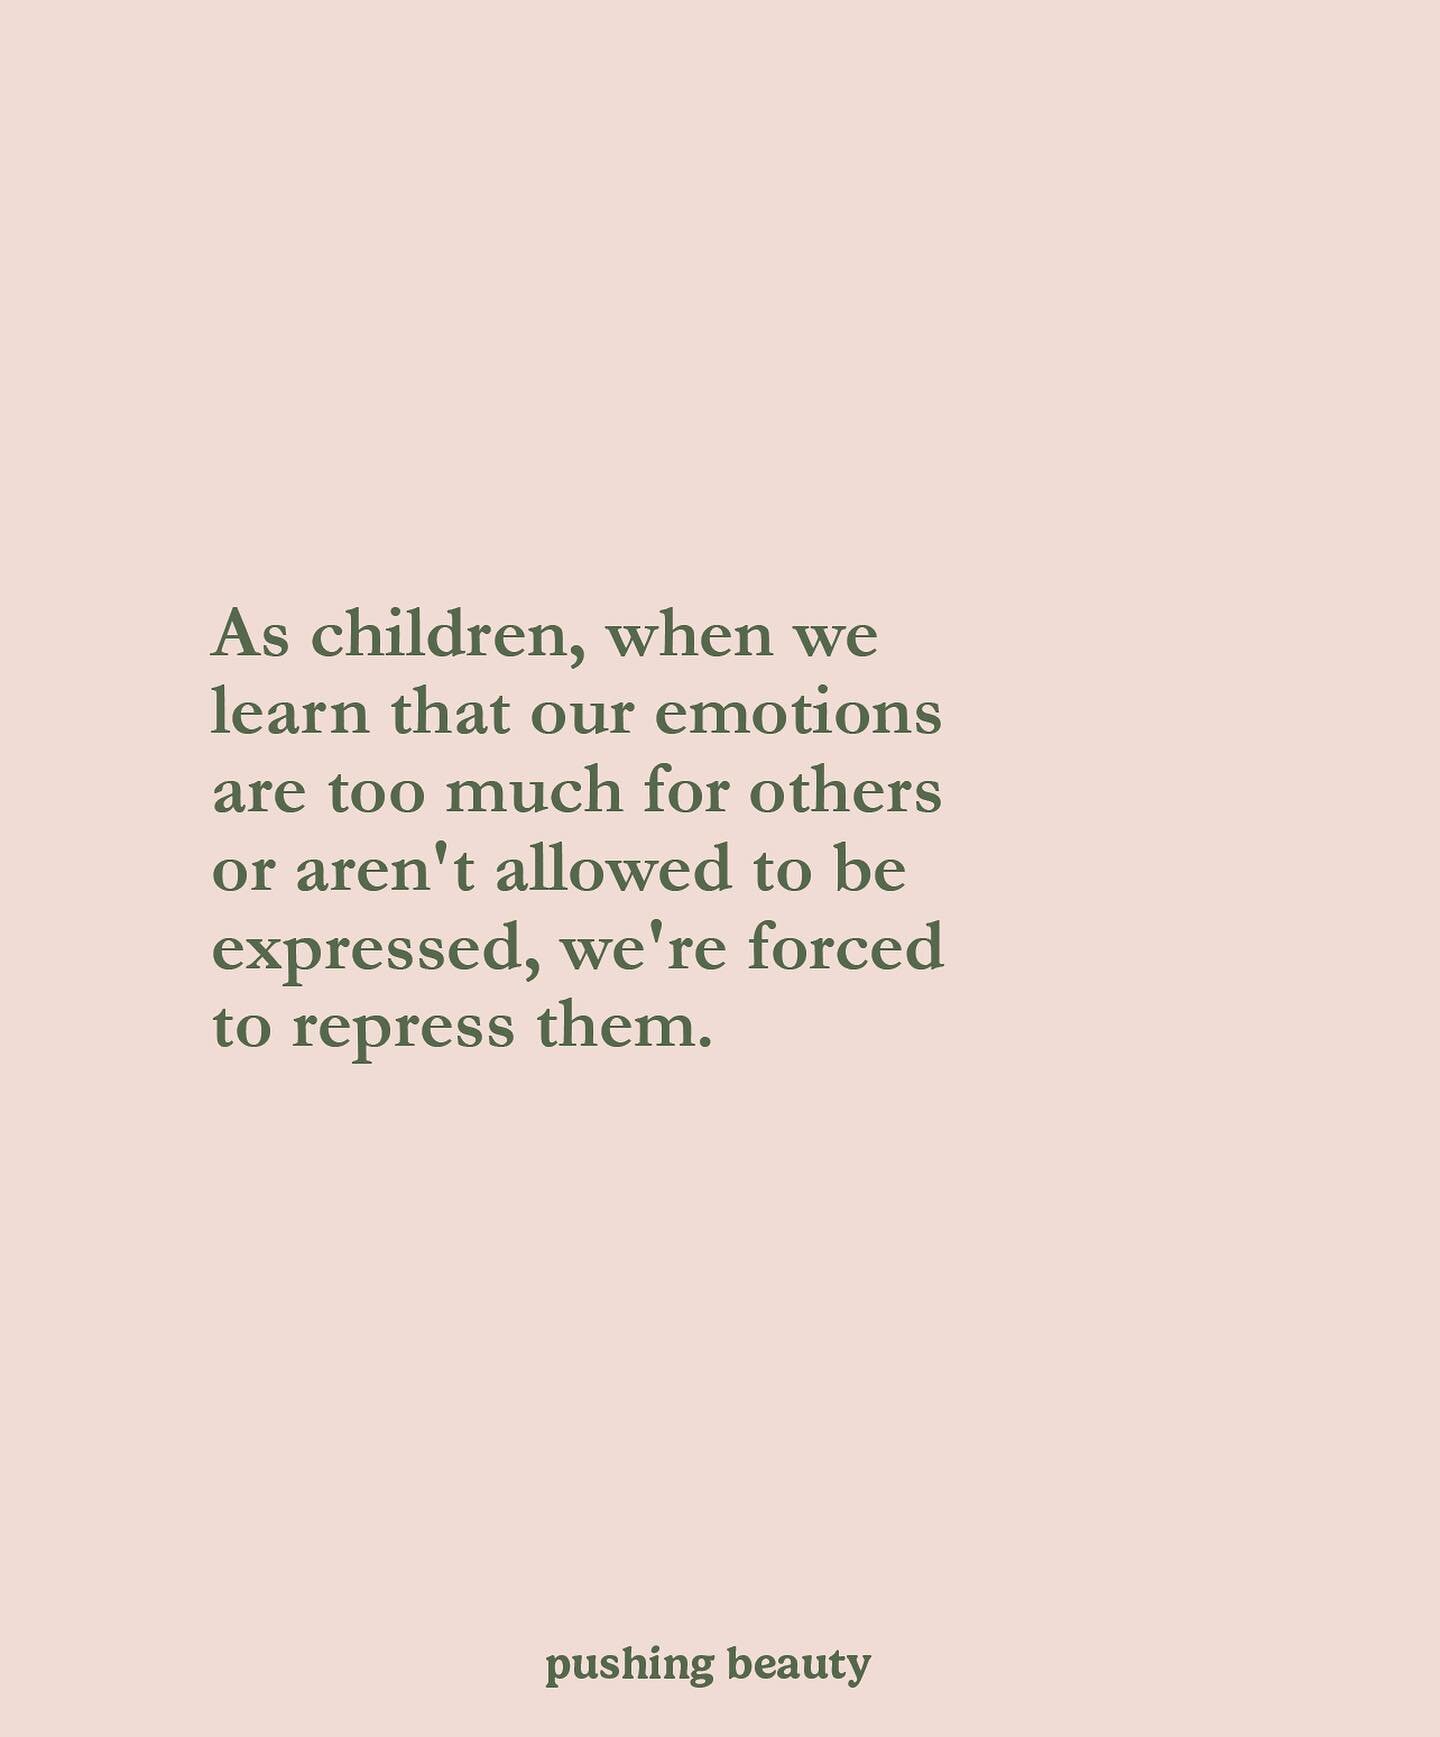 As children, when we learn that our emotions are too much for others or aren't allowed to be expressed, we're forced to repress them.

What is repressed doesn't disappear. We live in a culture that doesn't yet fully grasp the reality that many of the